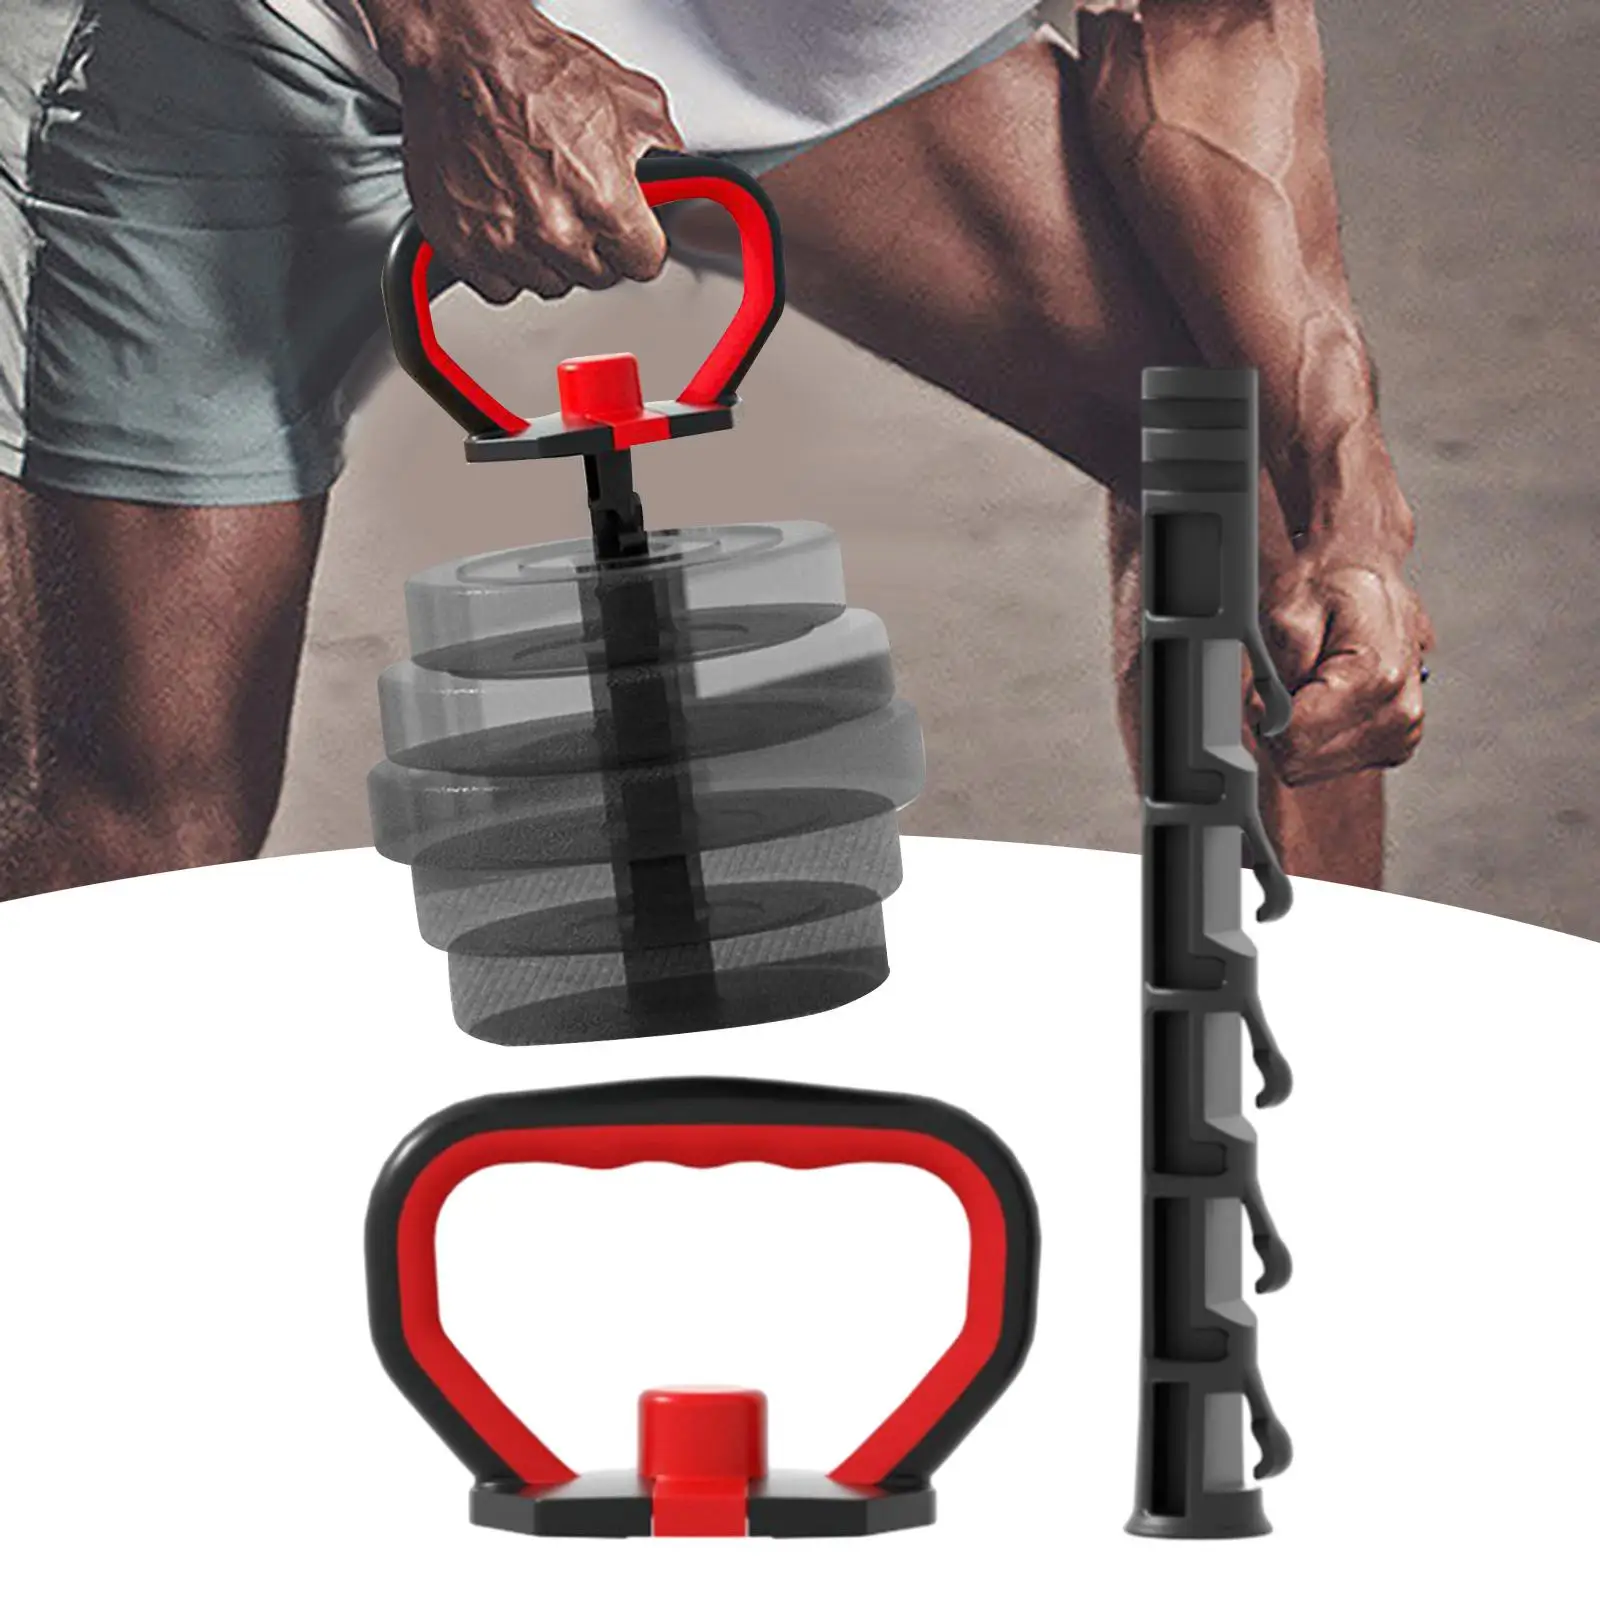 Kettle Bell Grip Handle Adjustable with Base Dumbbell Grip Home Gym Workout Strength Training Fitness Grip Handle for Plates